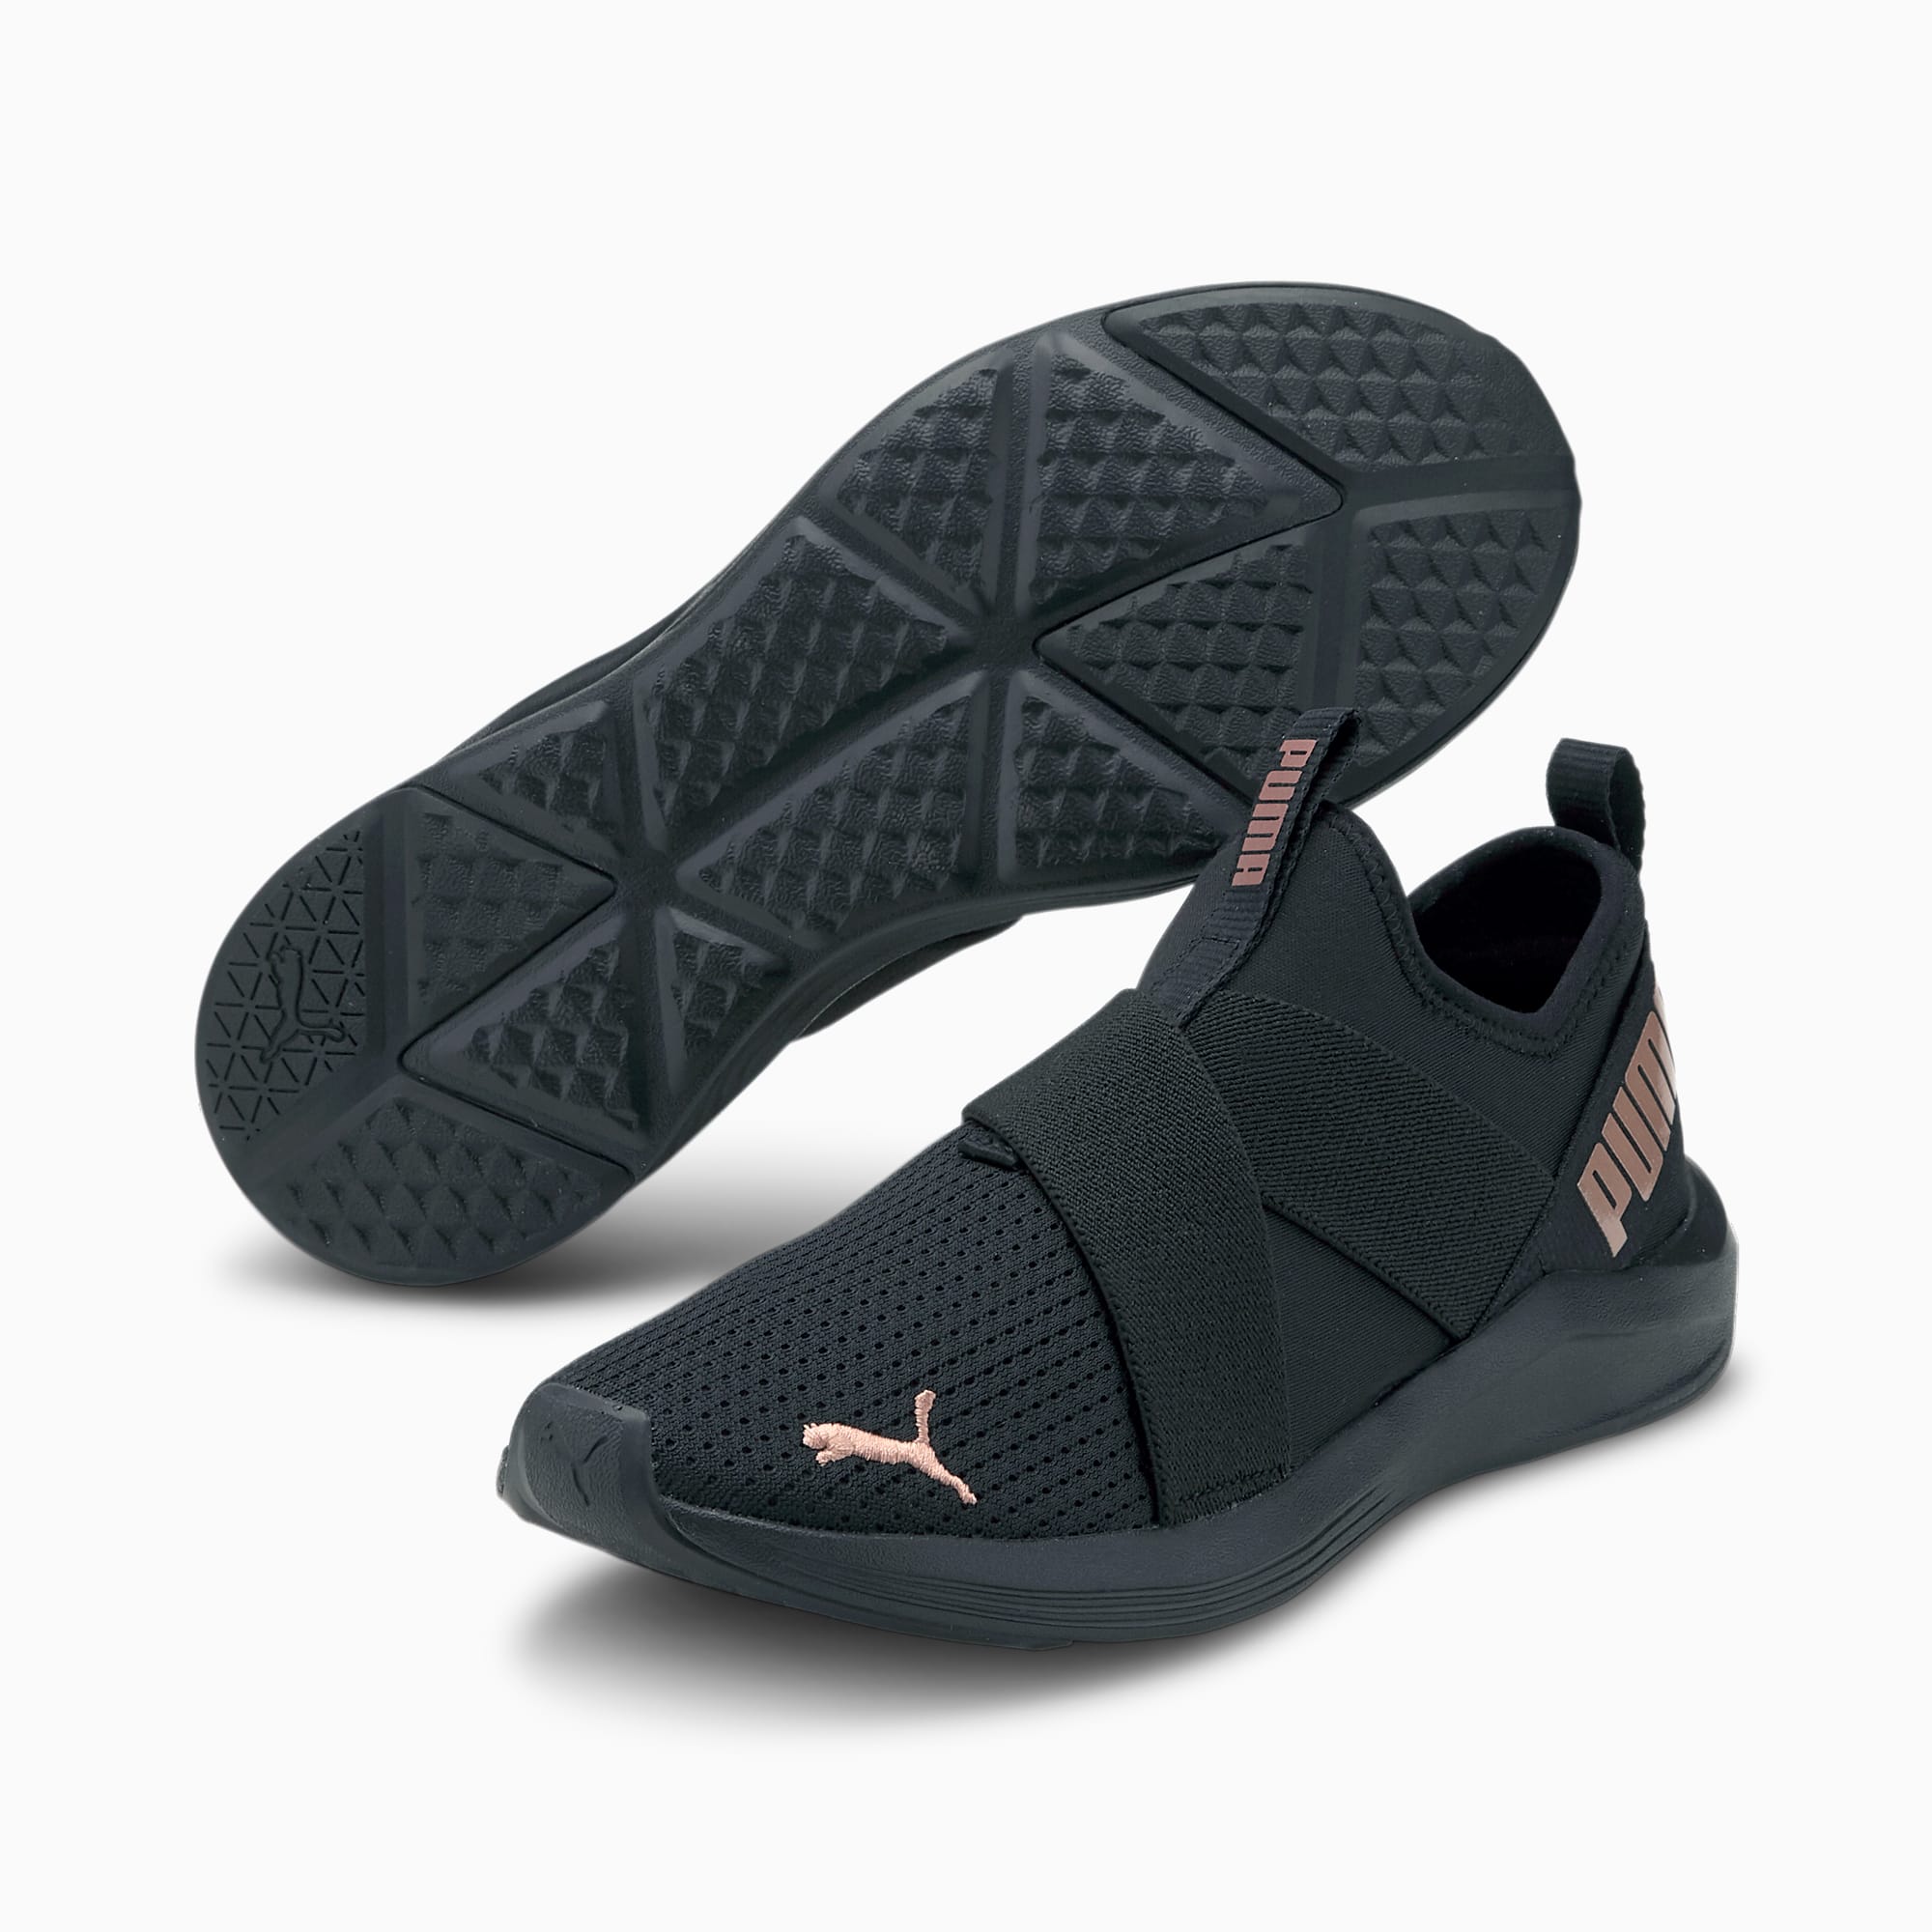 puma slip on shoes for ladies